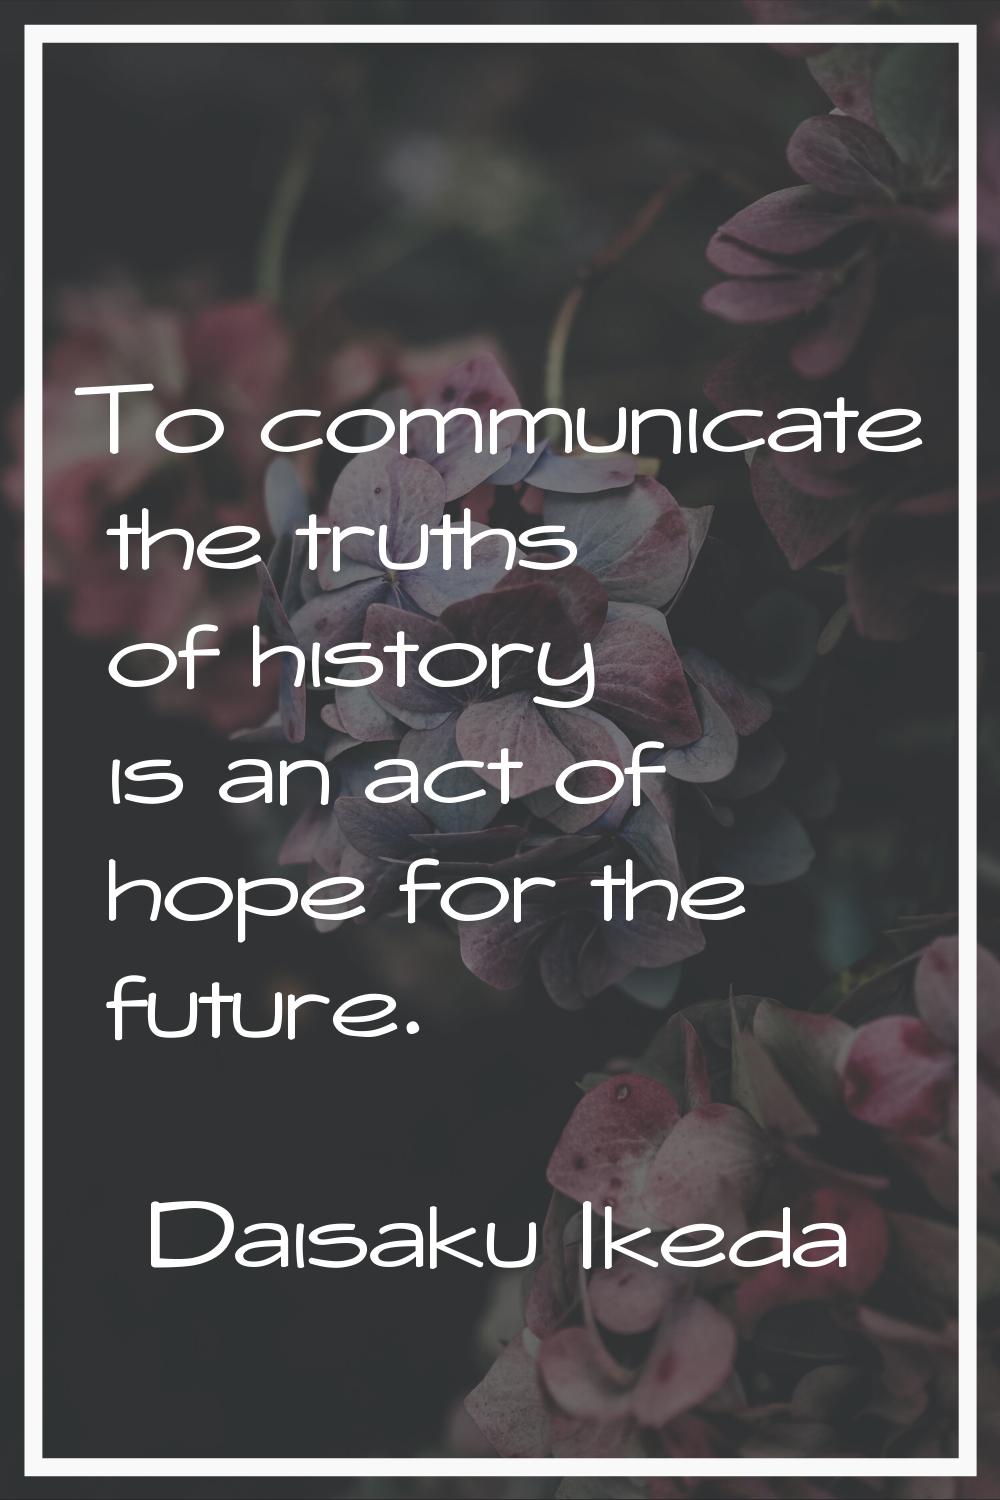 To communicate the truths of history is an act of hope for the future.